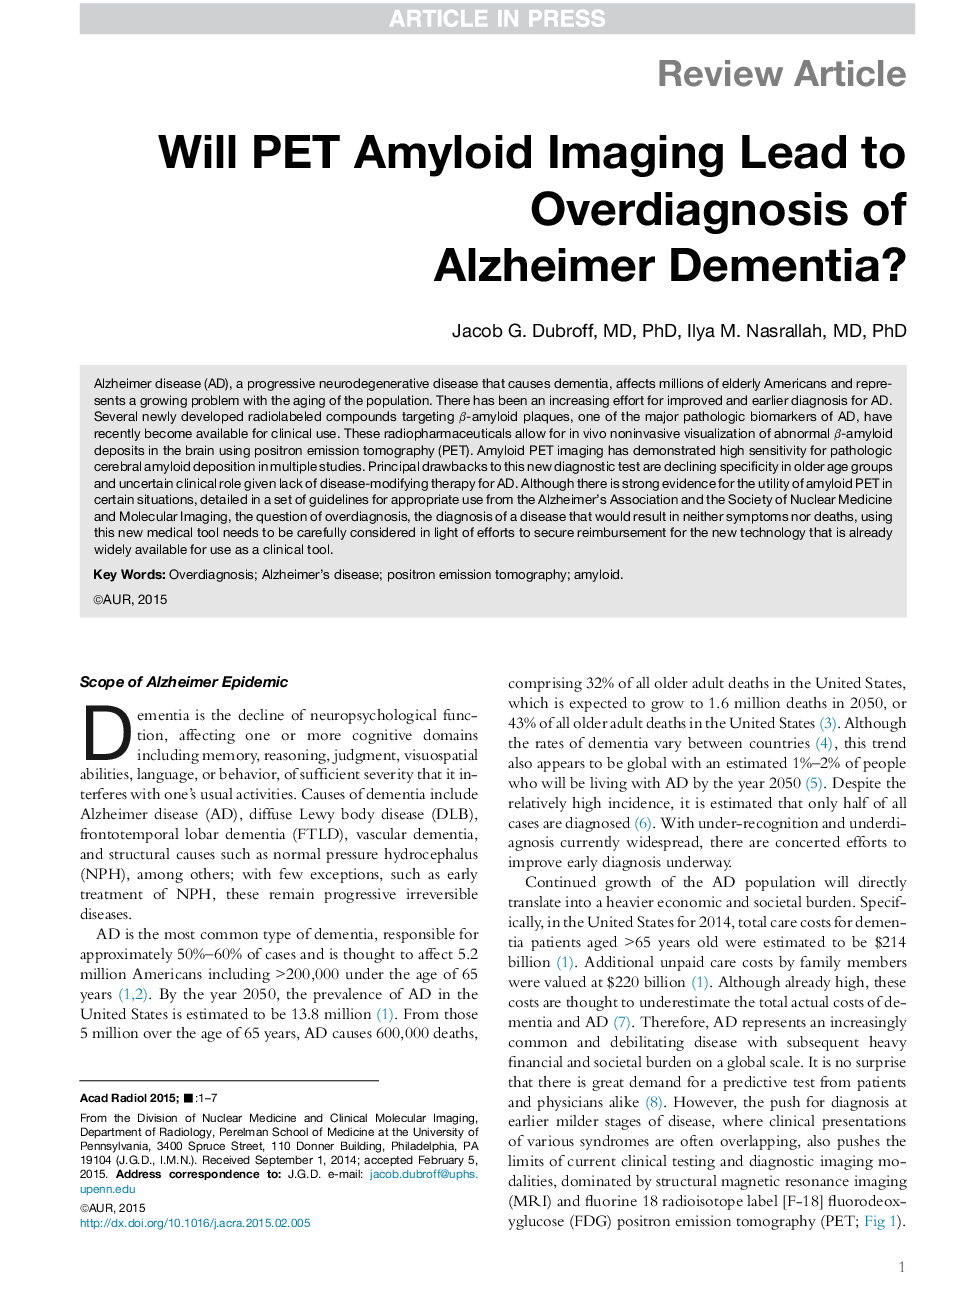 Will PET Amyloid Imaging Lead to Overdiagnosis of Alzheimer Dementia?